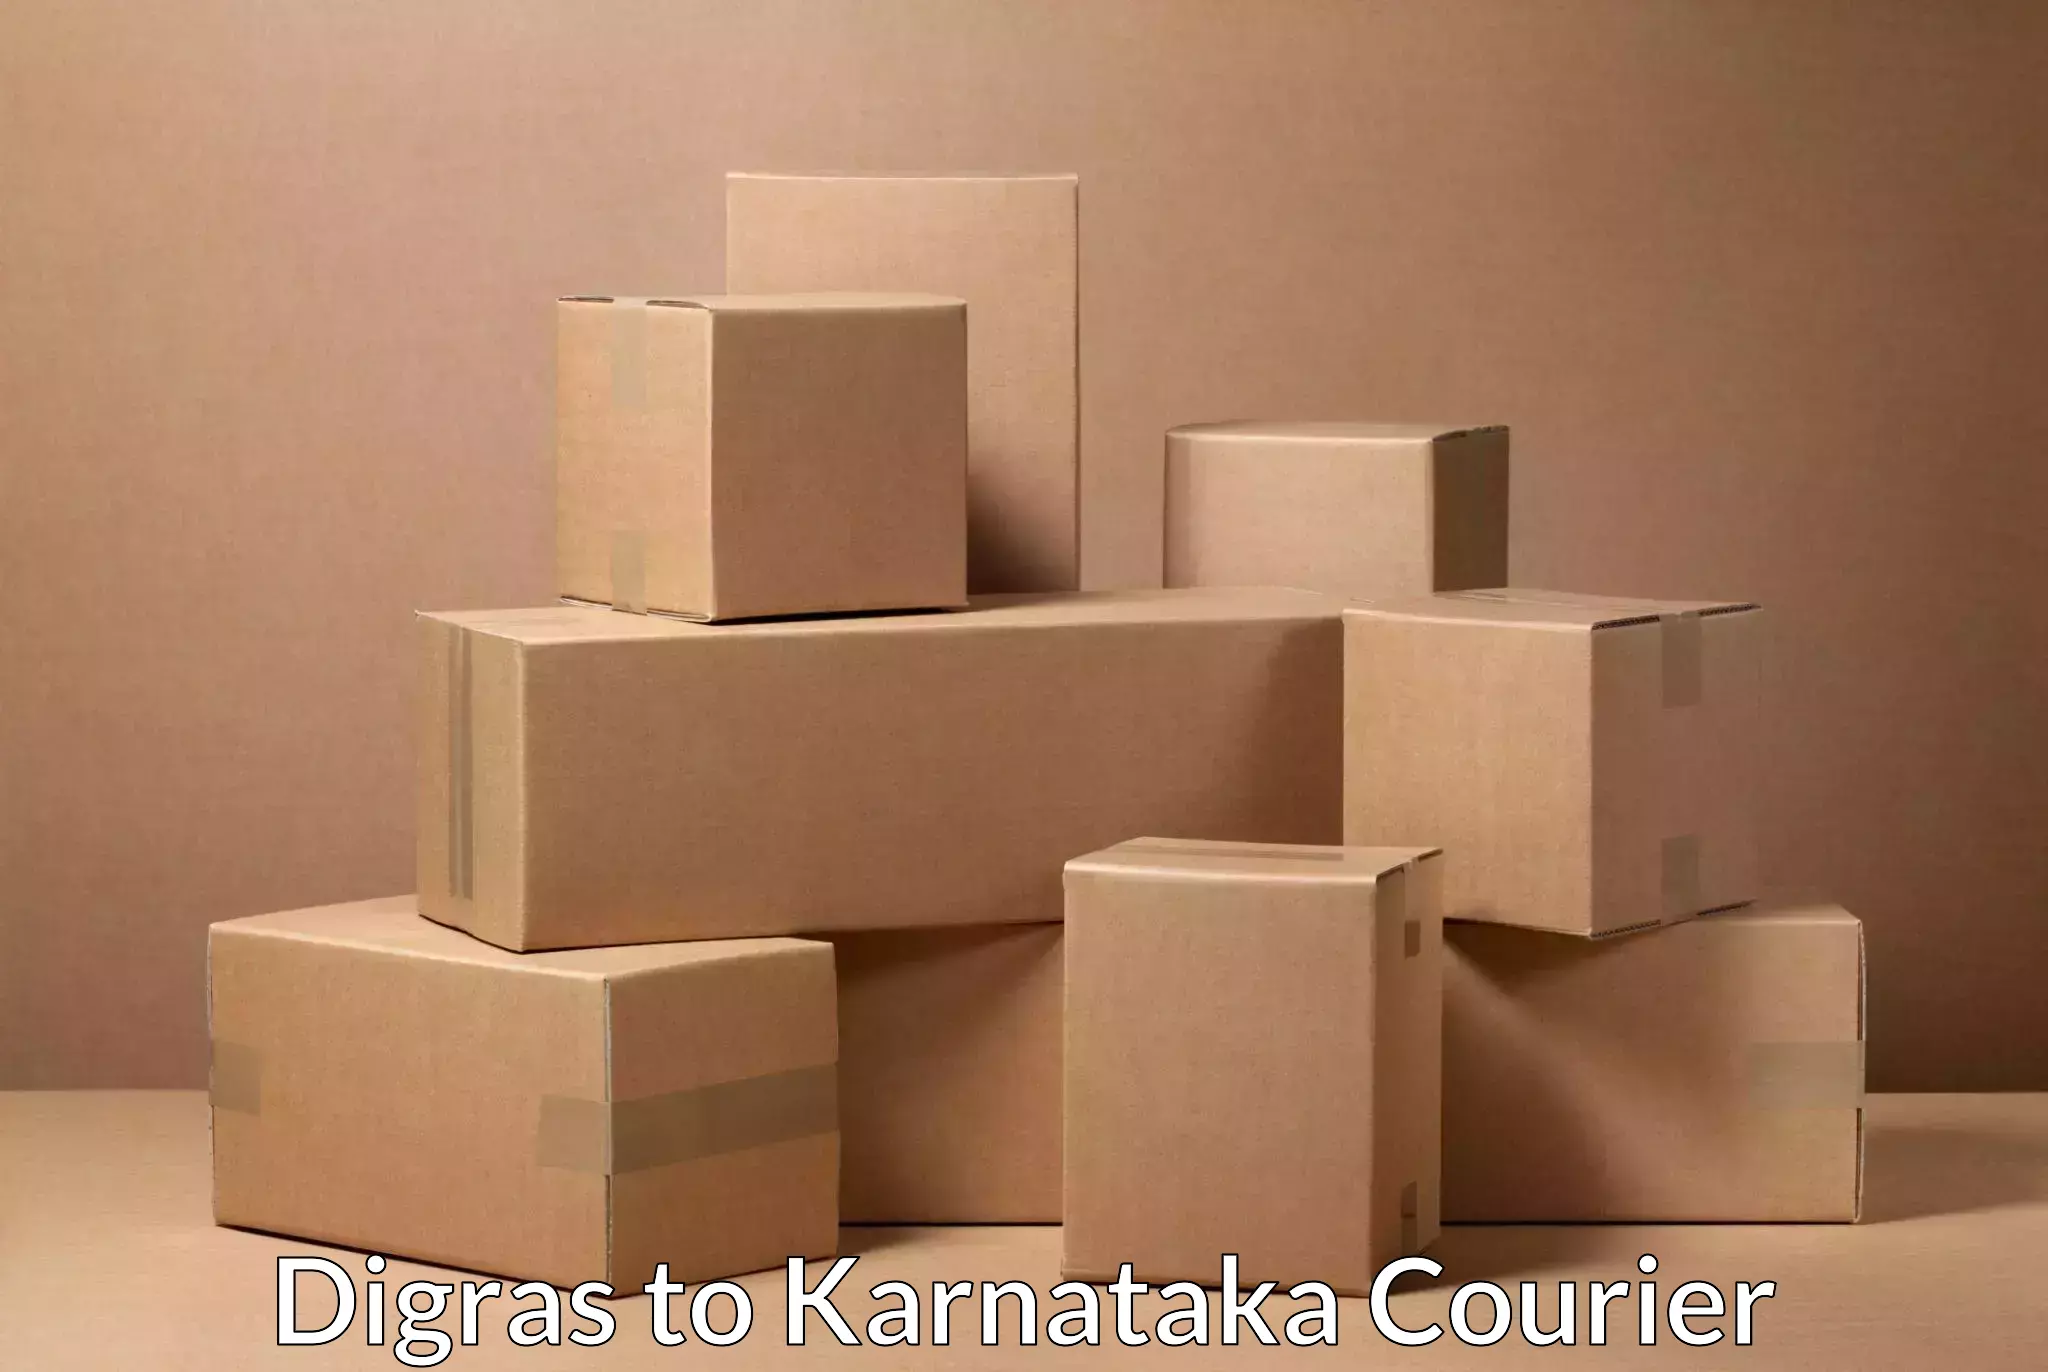 Professional delivery solutions in Digras to Karnataka